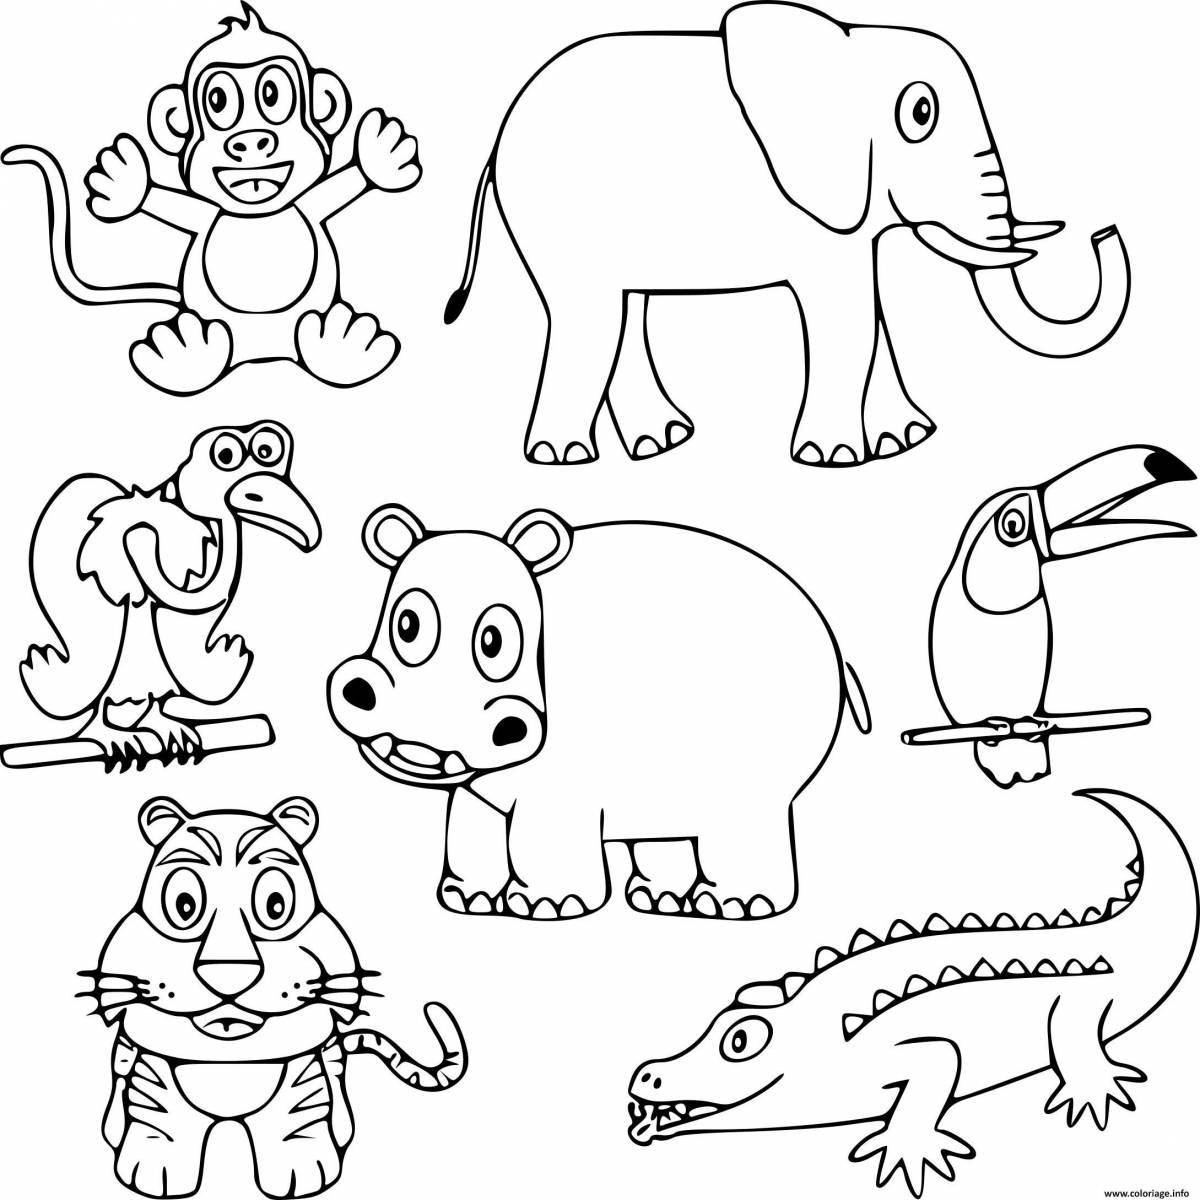 African animals creative coloring book for 4-5 year olds